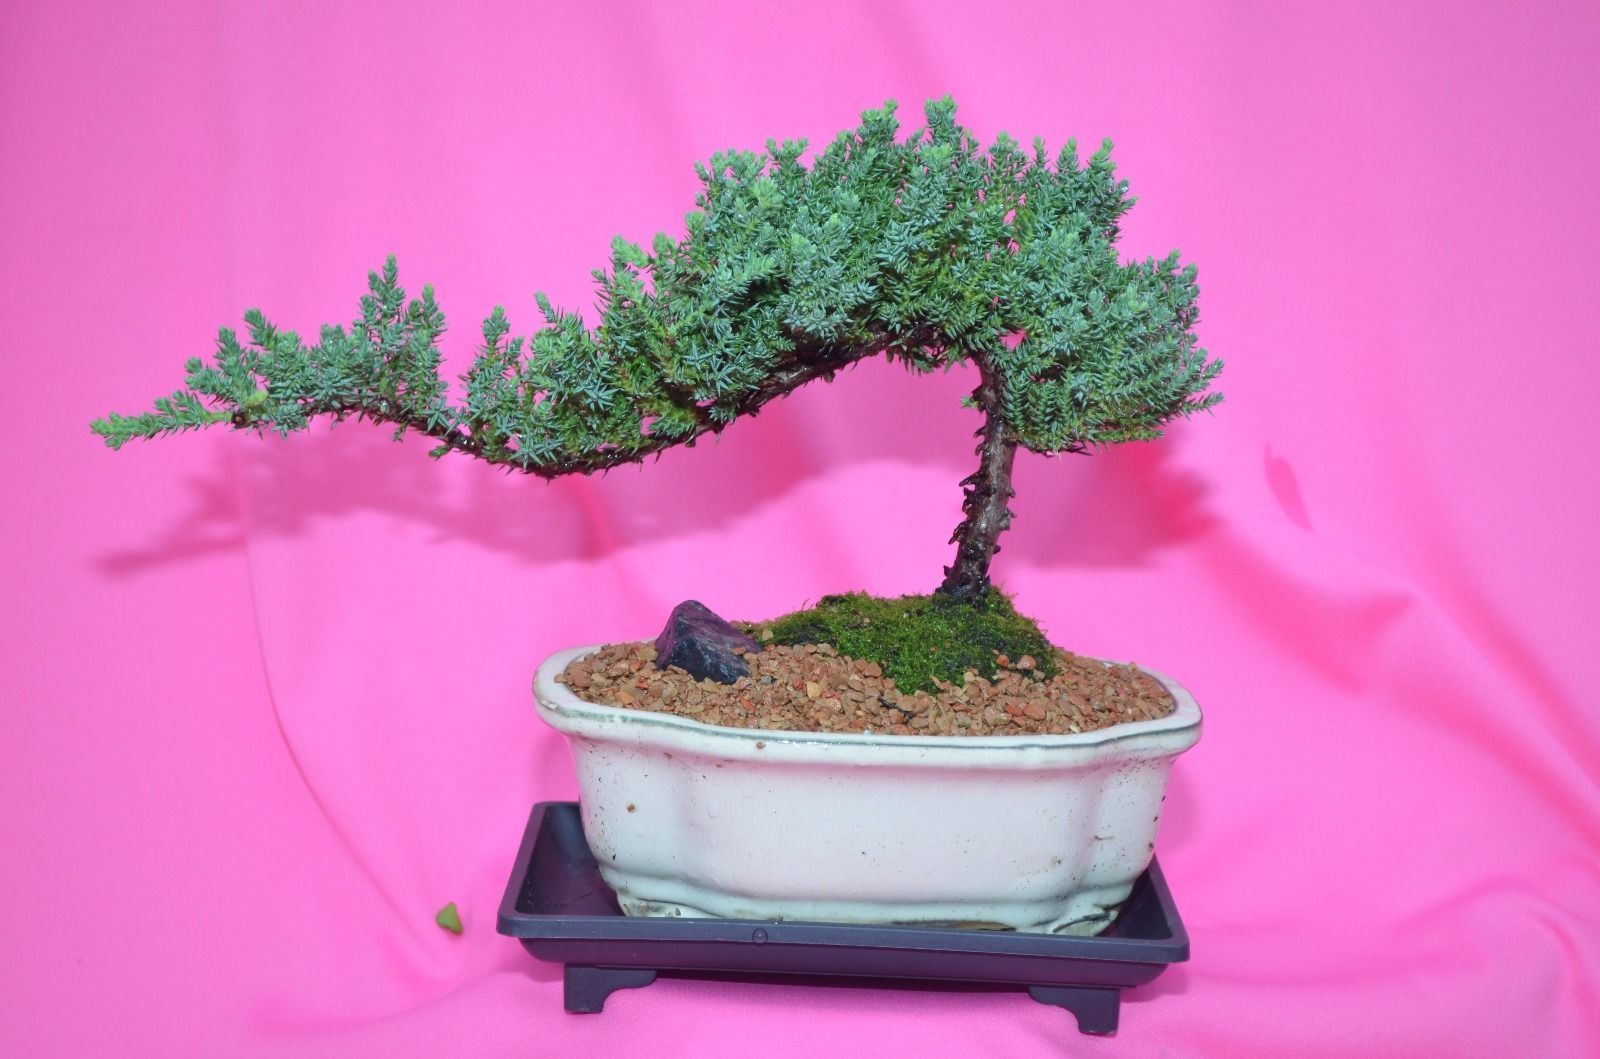 JAPANESE JUNIPER,TRADITIONAL BONSAI, 8 YEARS OLD,ACTUAL BONSAI FOR SALE NOT PIC! - $69.99